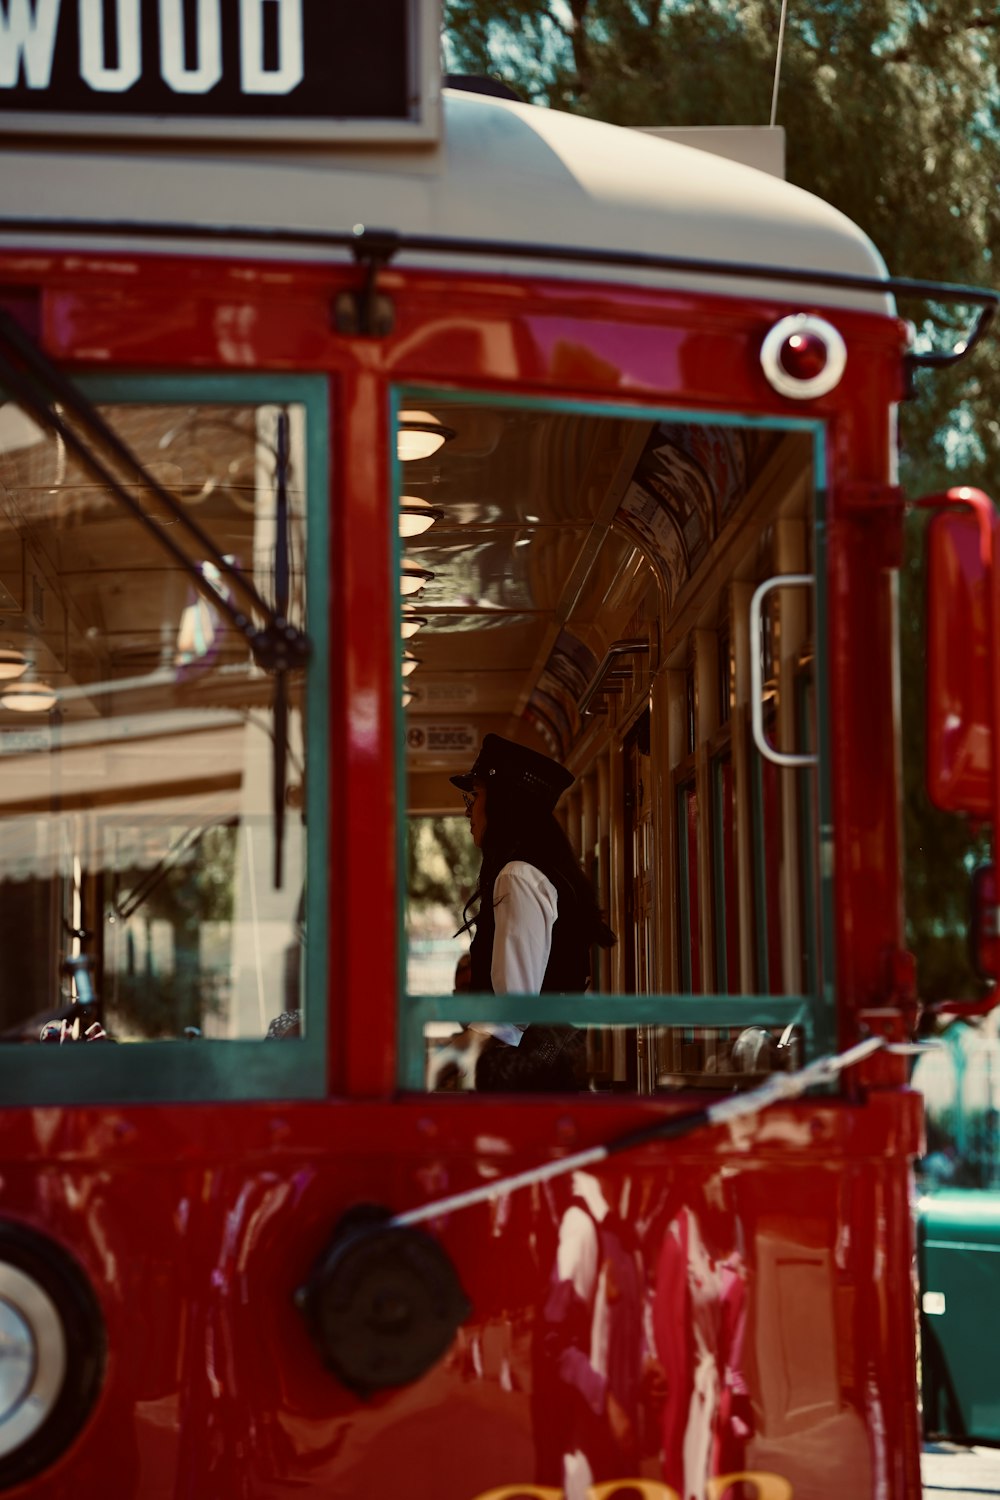 a red and white trolley car on a city street